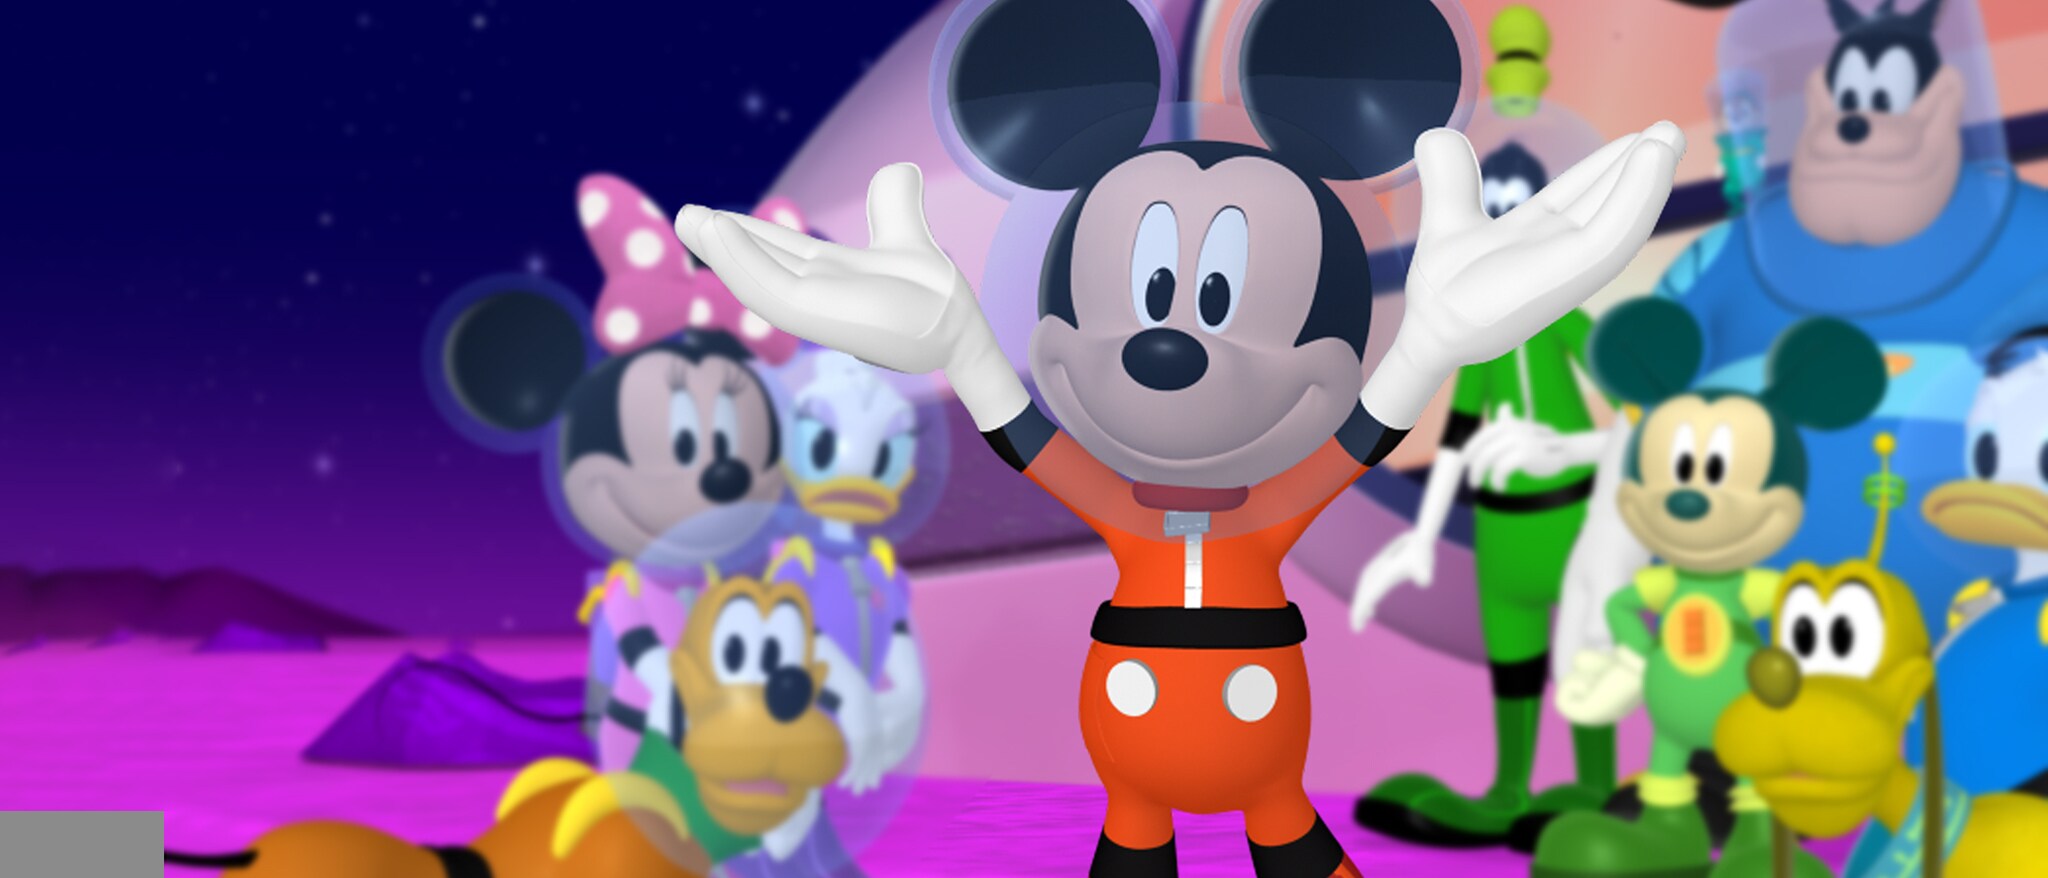 Mickey Mouse Clubhouse Space Adventure Disney Movies